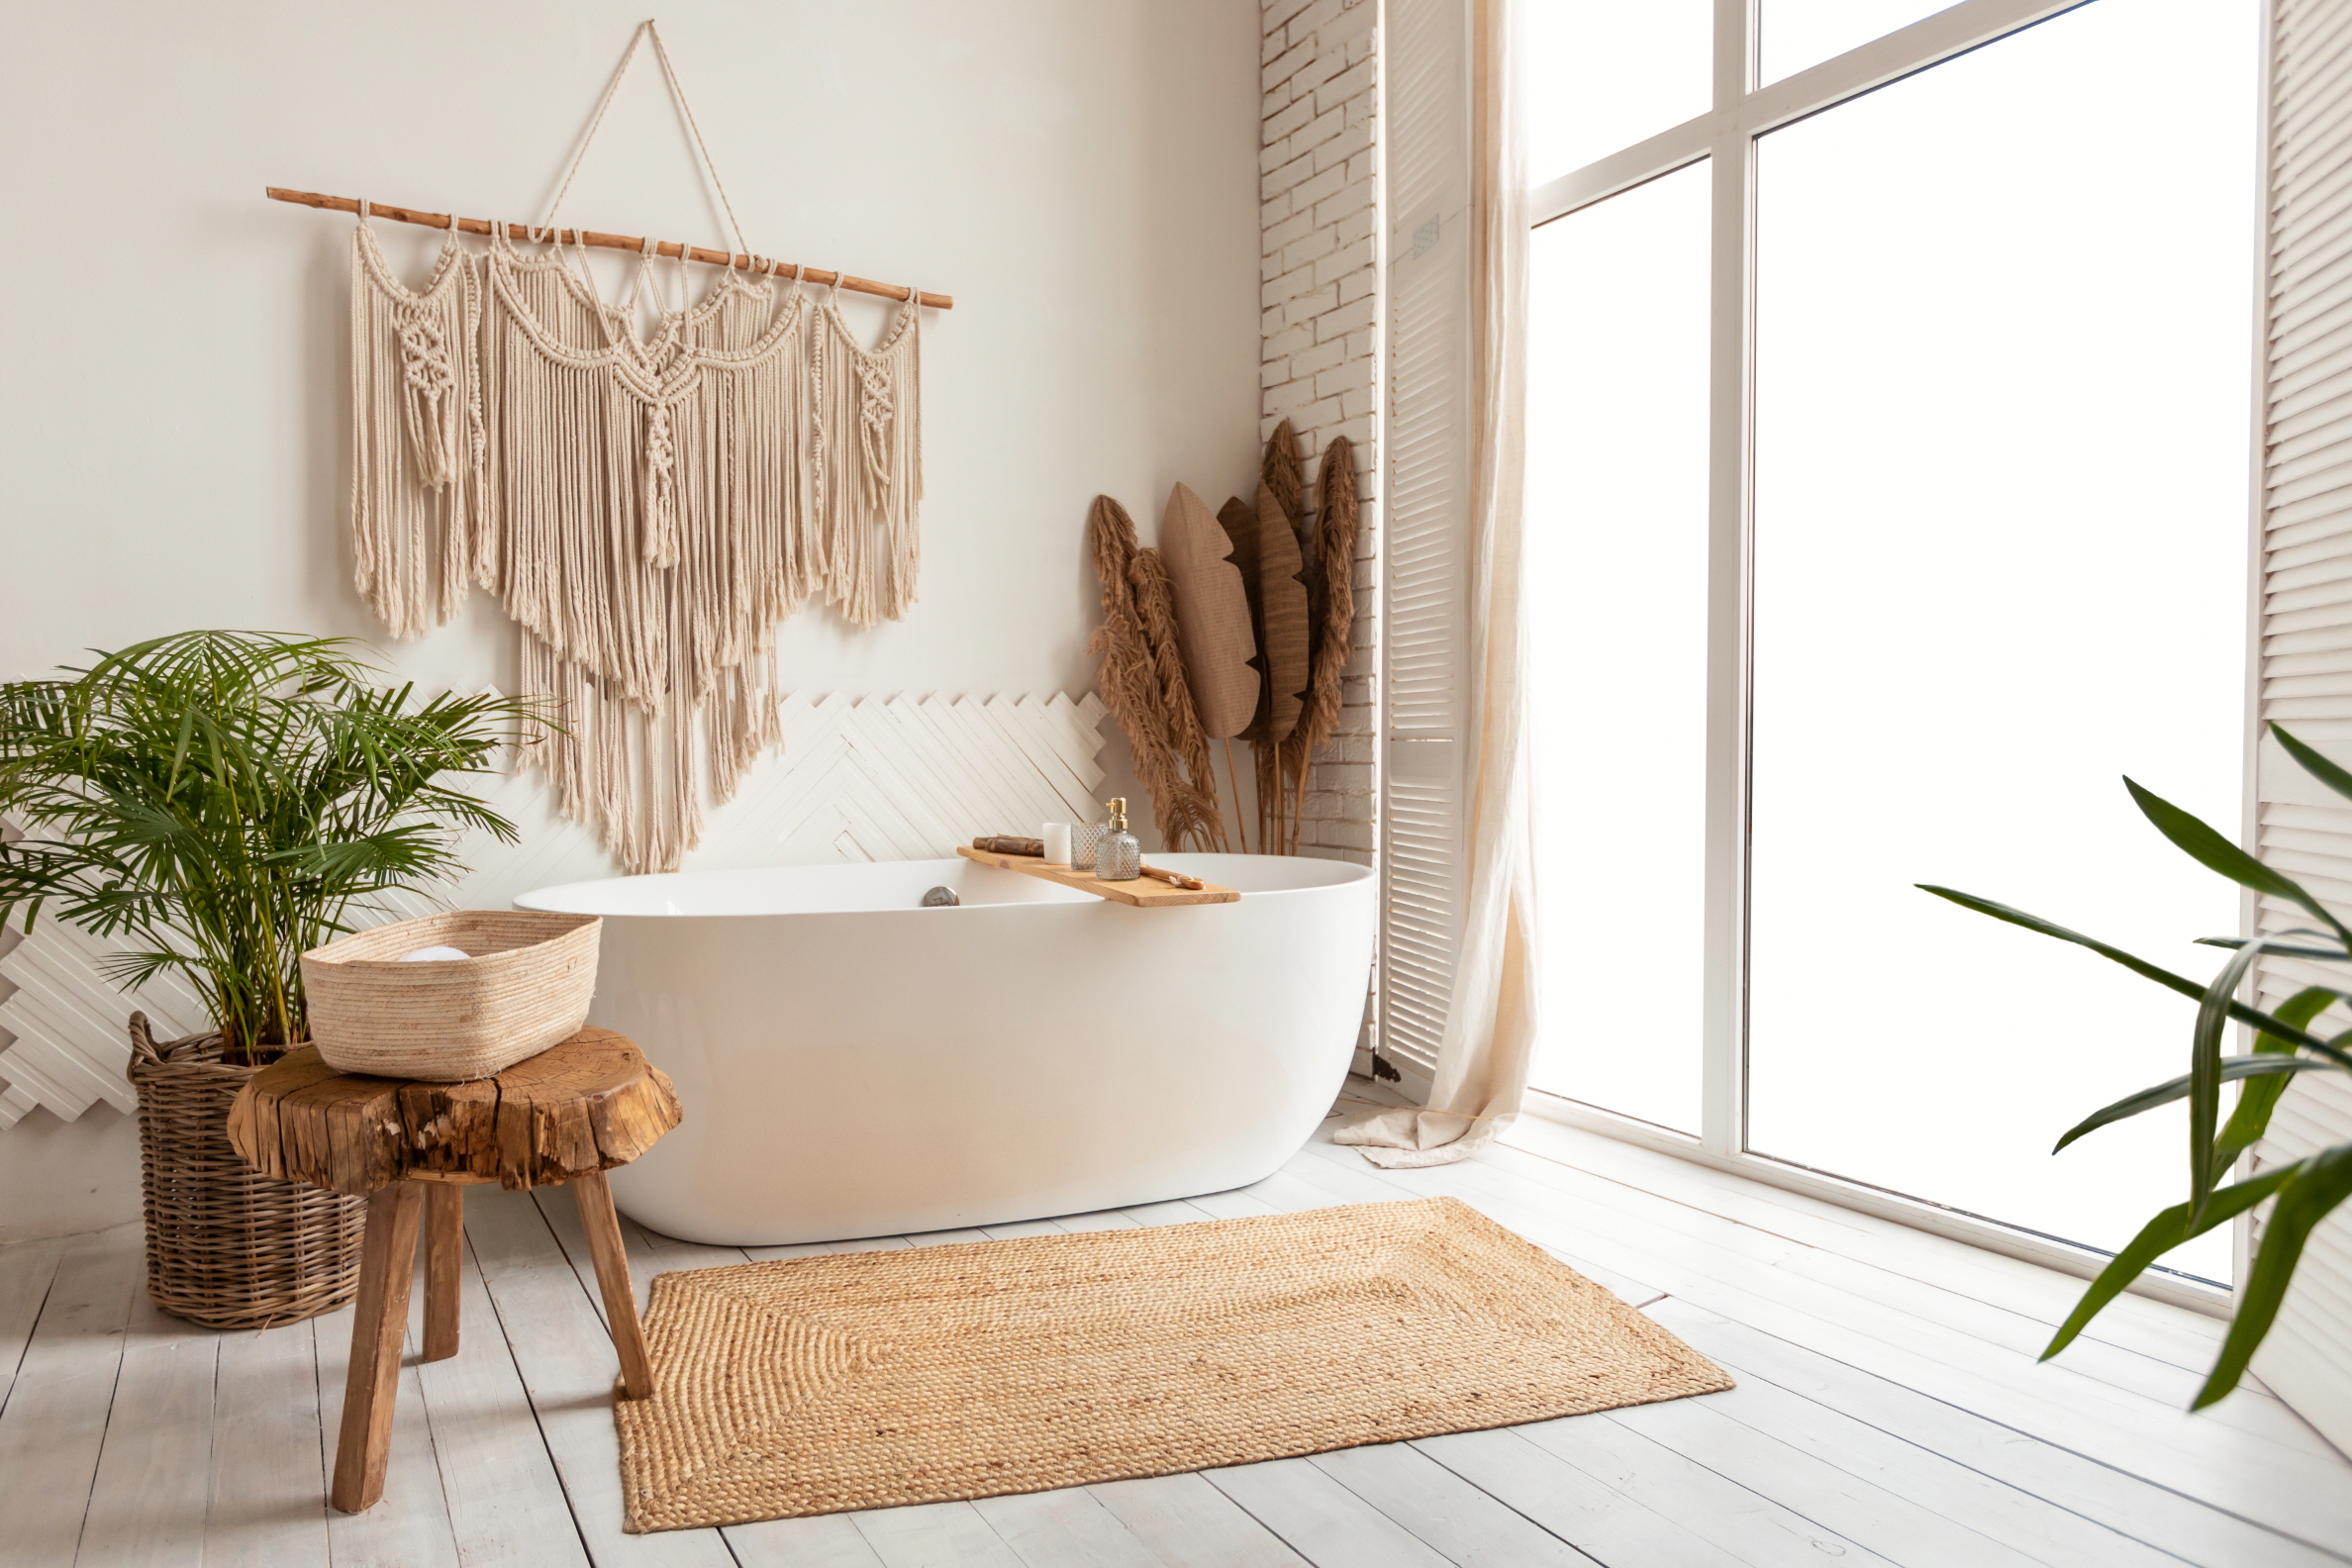 Boho-up your primary bathroom with vibrant colors, eclectic patterns, and natural textures, along with vintage rugs and rattan accents for a relaxed vibe.